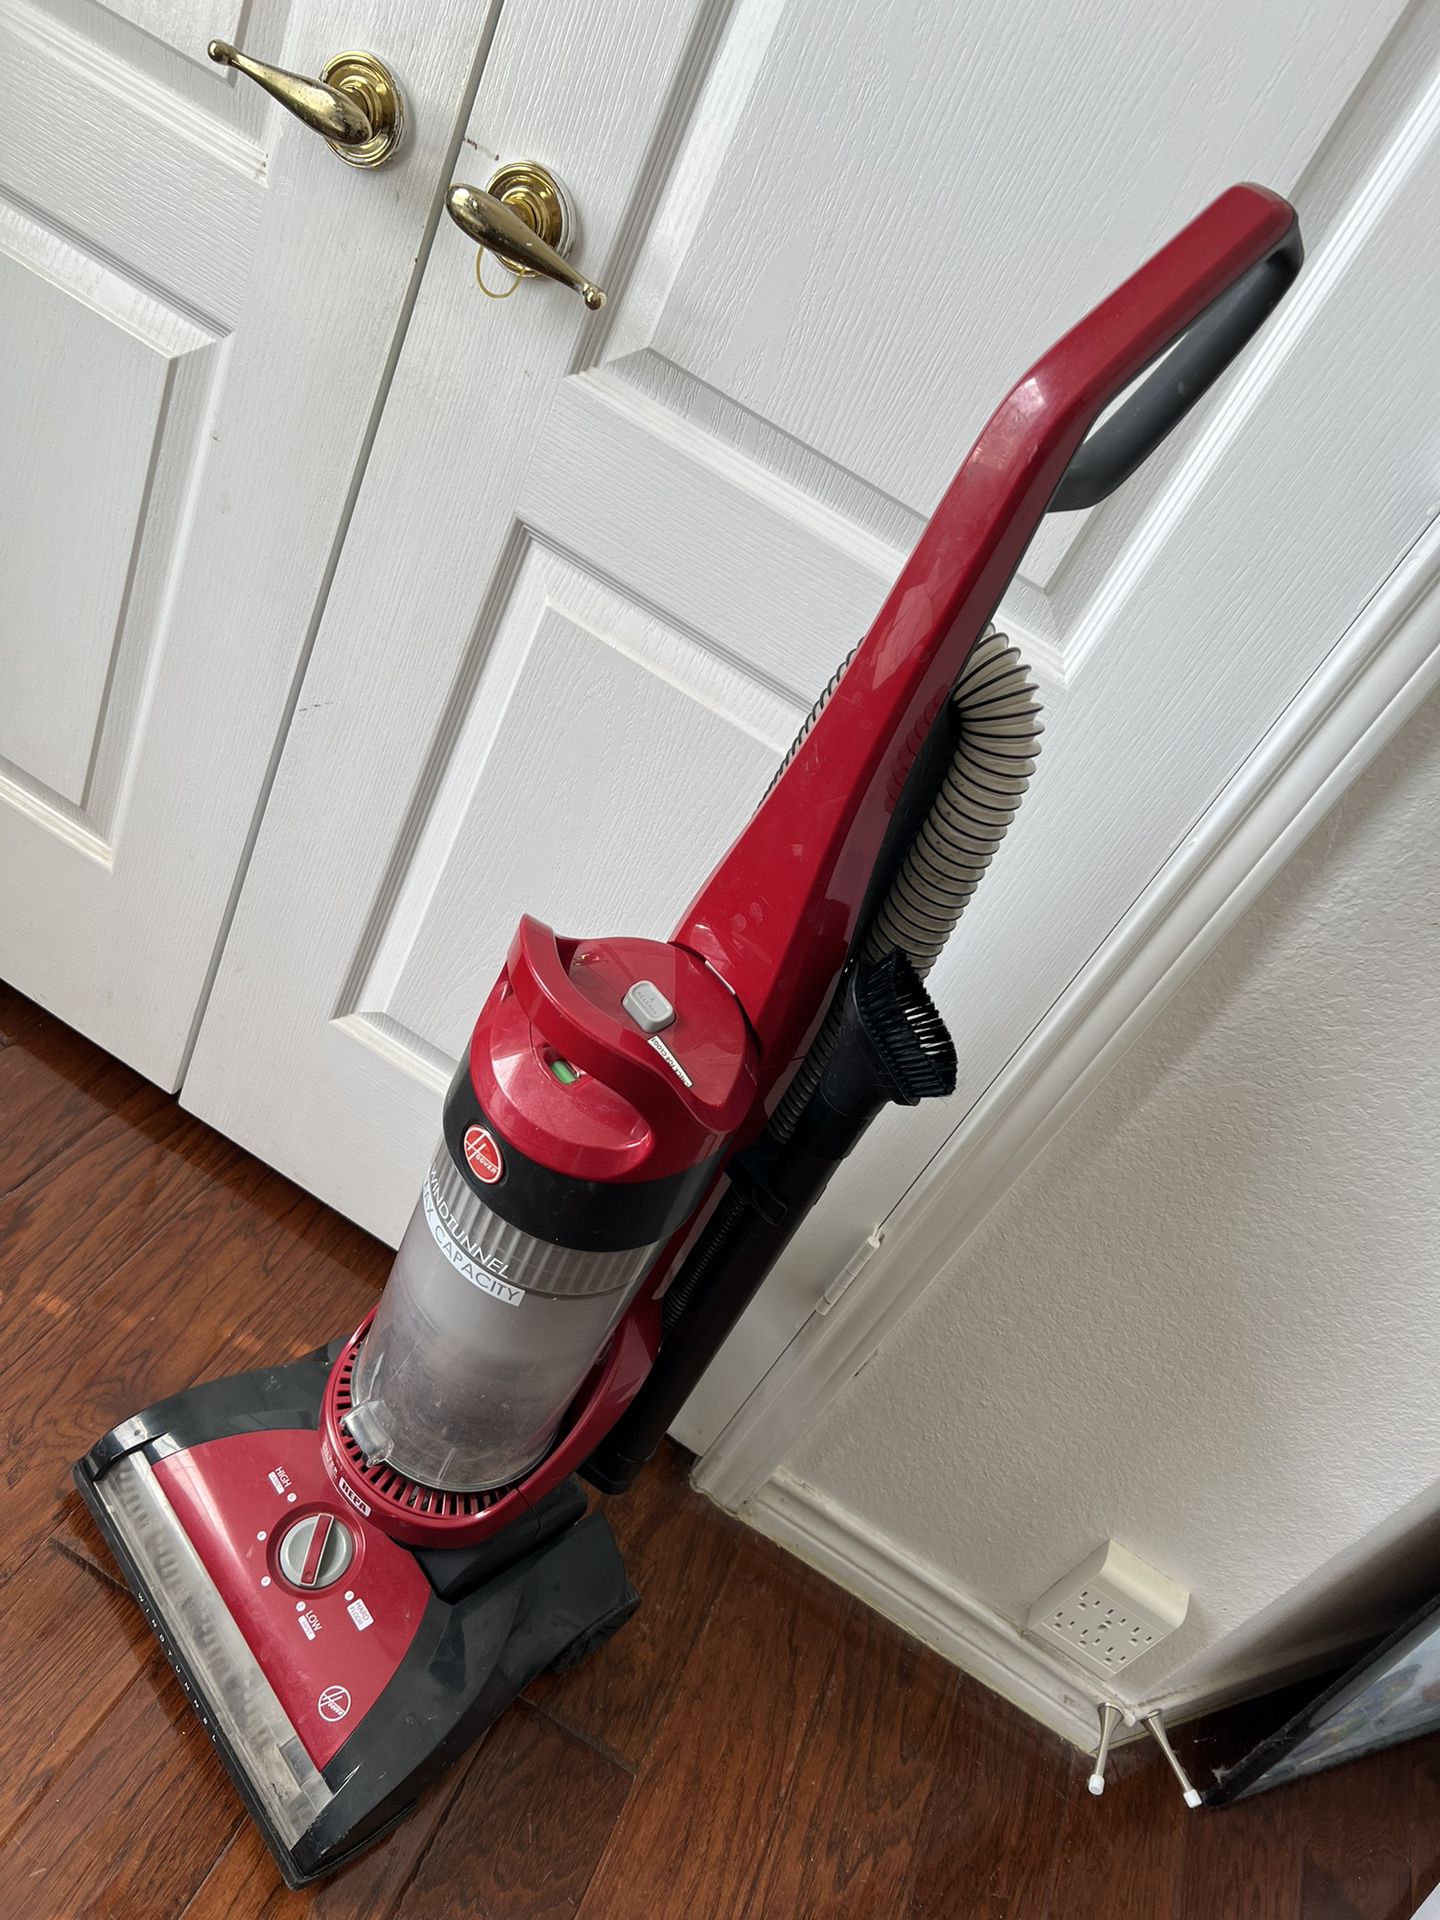 Hoover WindTunnel Whole House Rewind Upright Vacuum Cleaner UH71100.